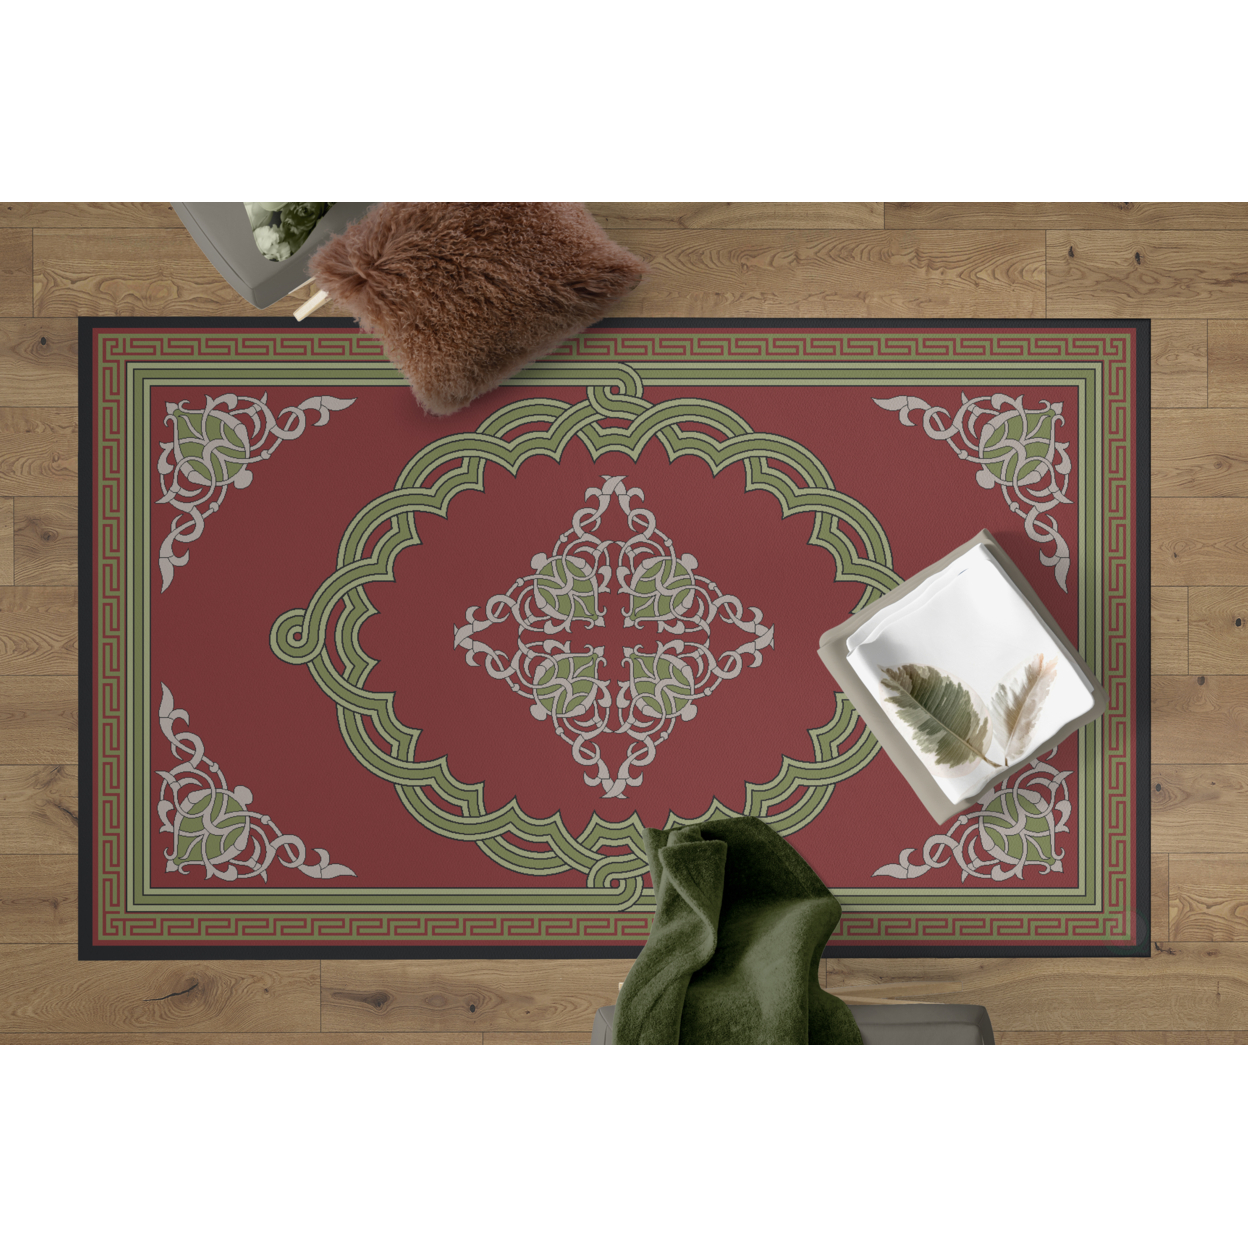 Deerlux Transitional Living Room Area Rug With Nonslip Backing, Red Medallion Pattern - 9 X 12